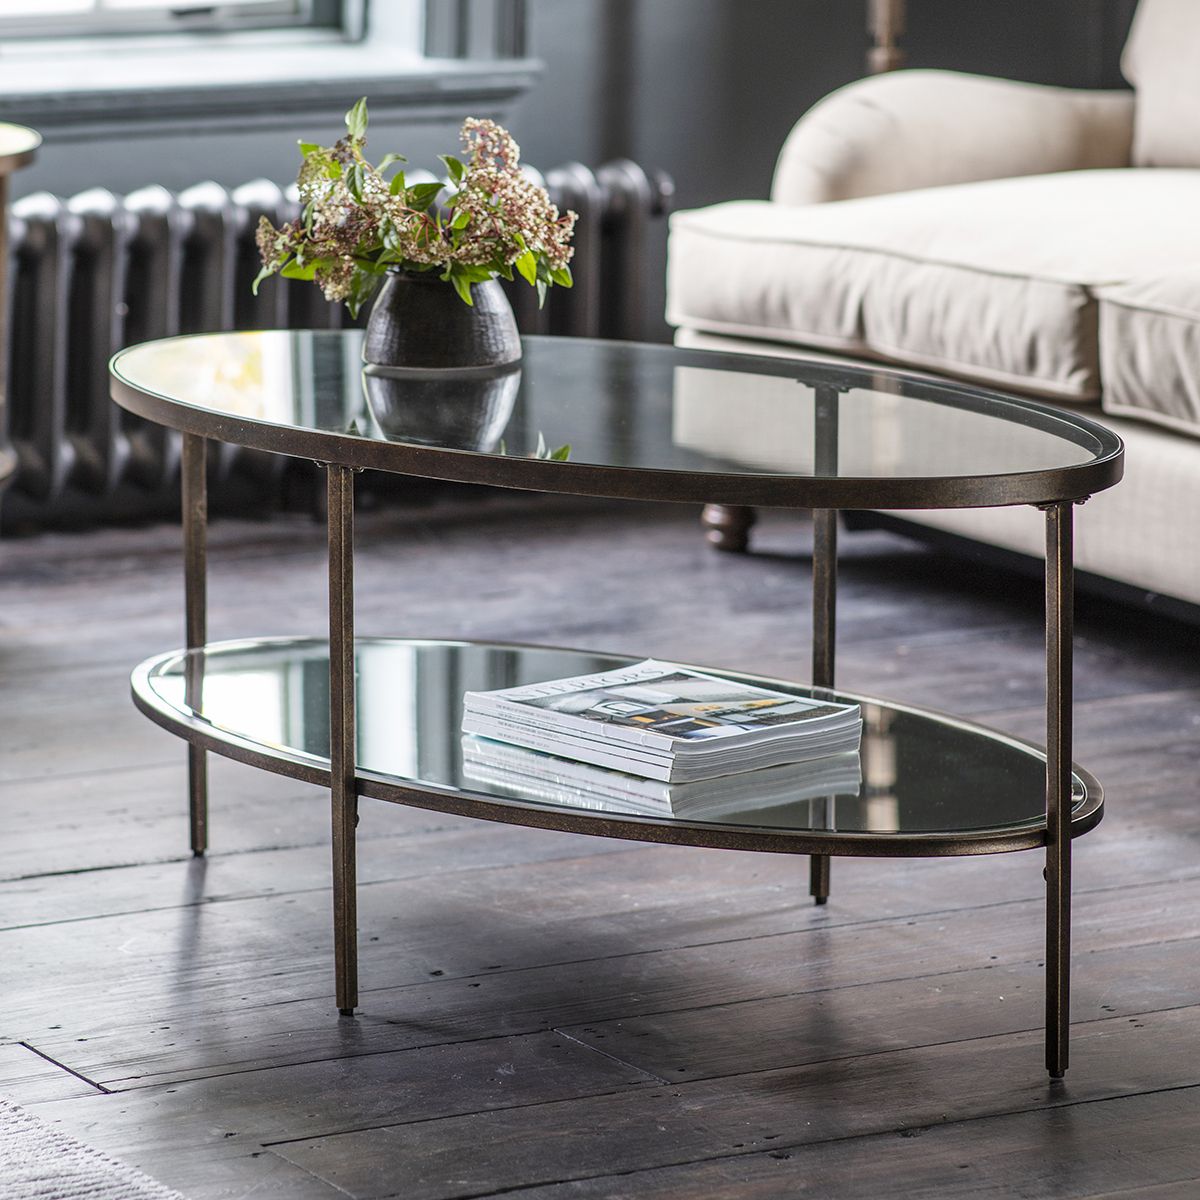 Adoi 112cm Oval Metal Coffee Table – Bronze | Knees.co (View 1 of 15)